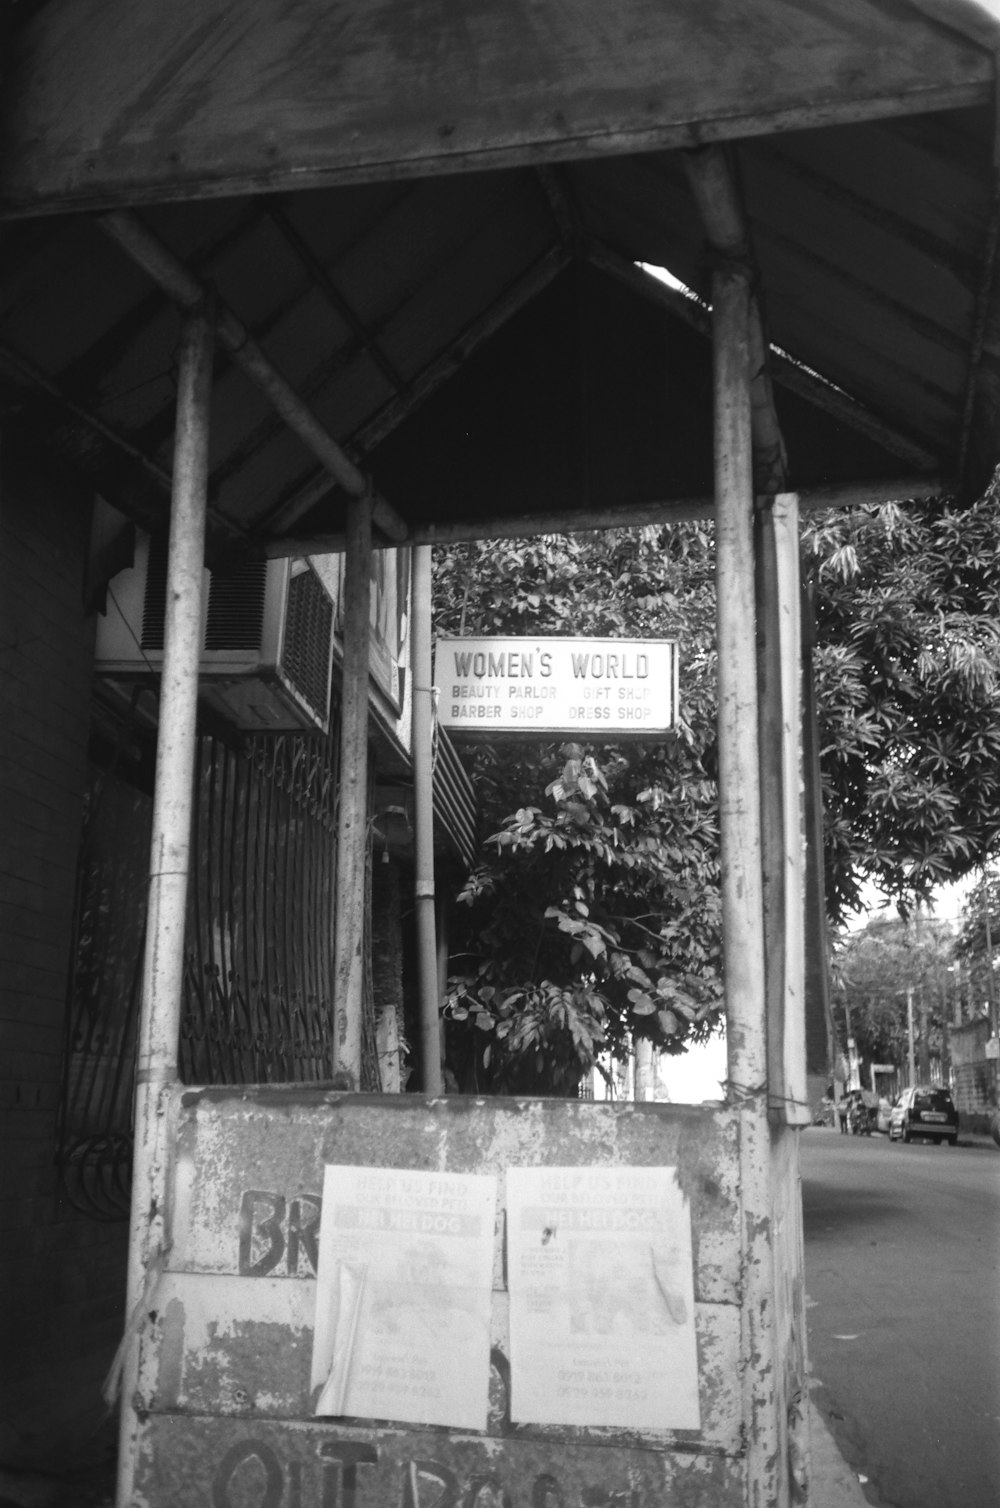 a black and white photo of a women's world sign